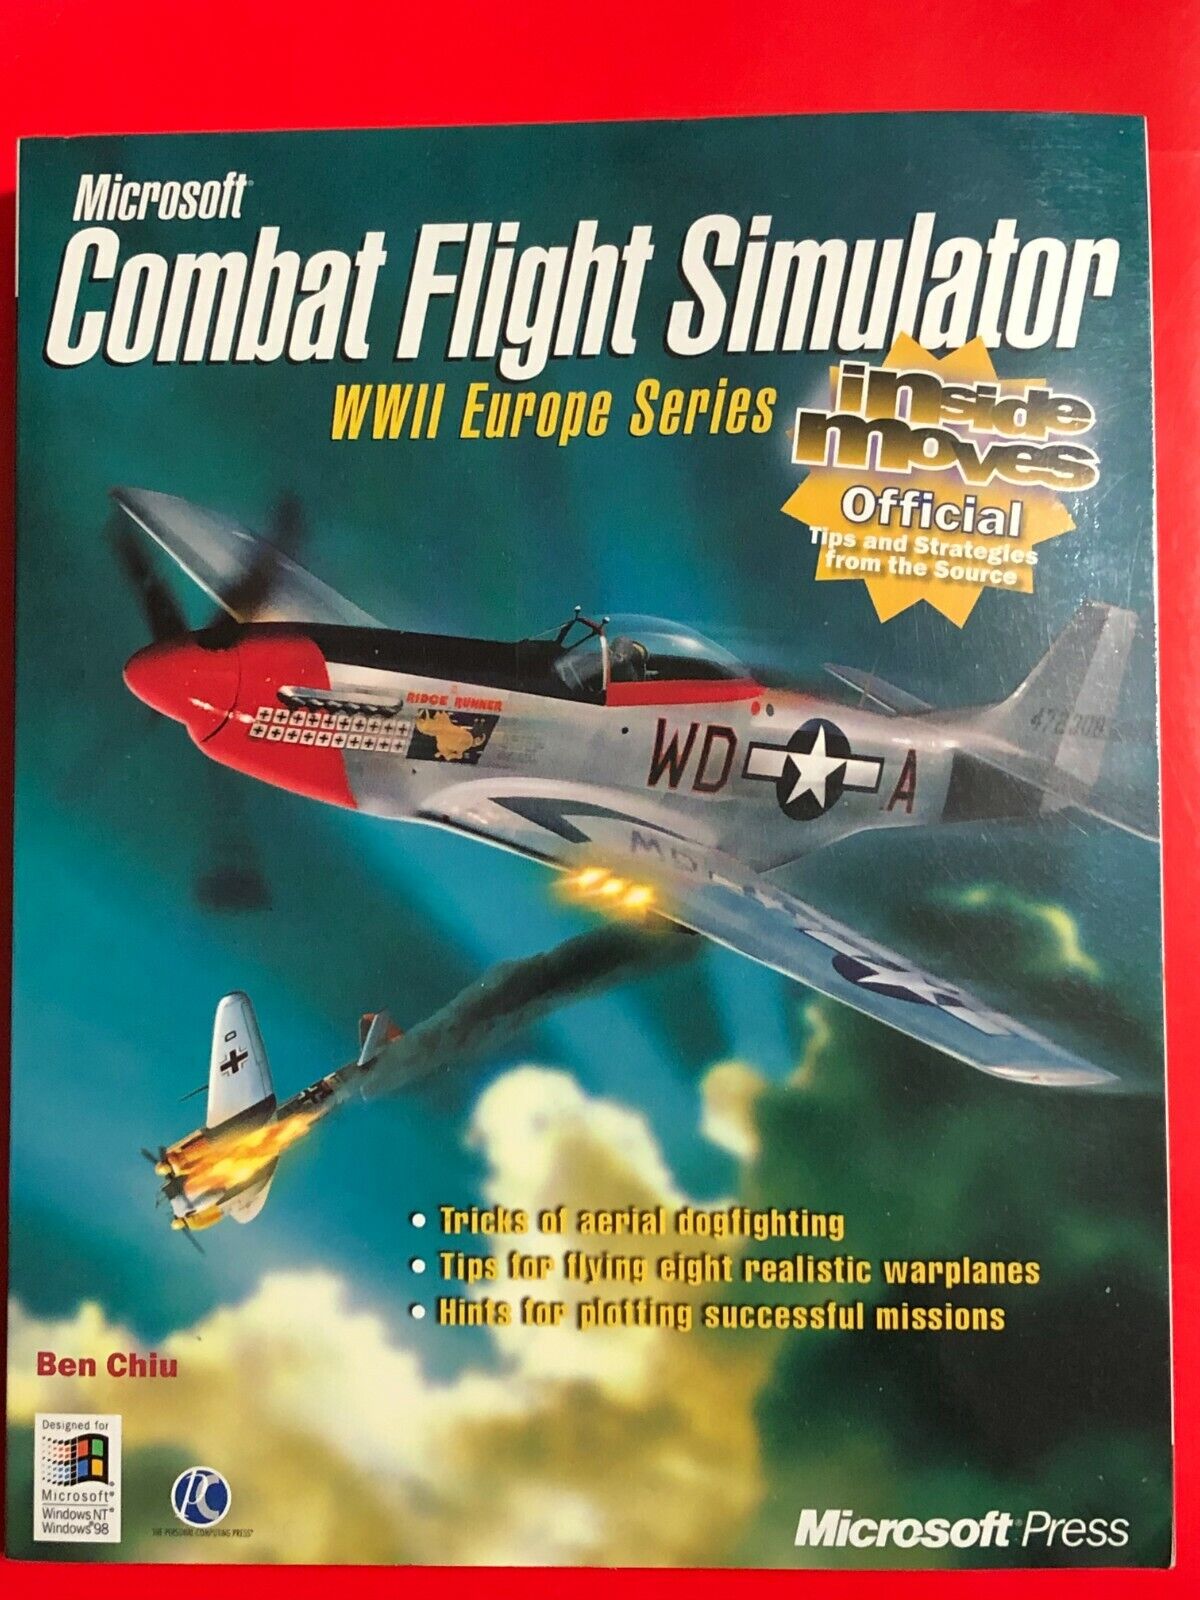 Microsoft Combat Flight Simulator WWII Europe Series Inside Moves Official Book